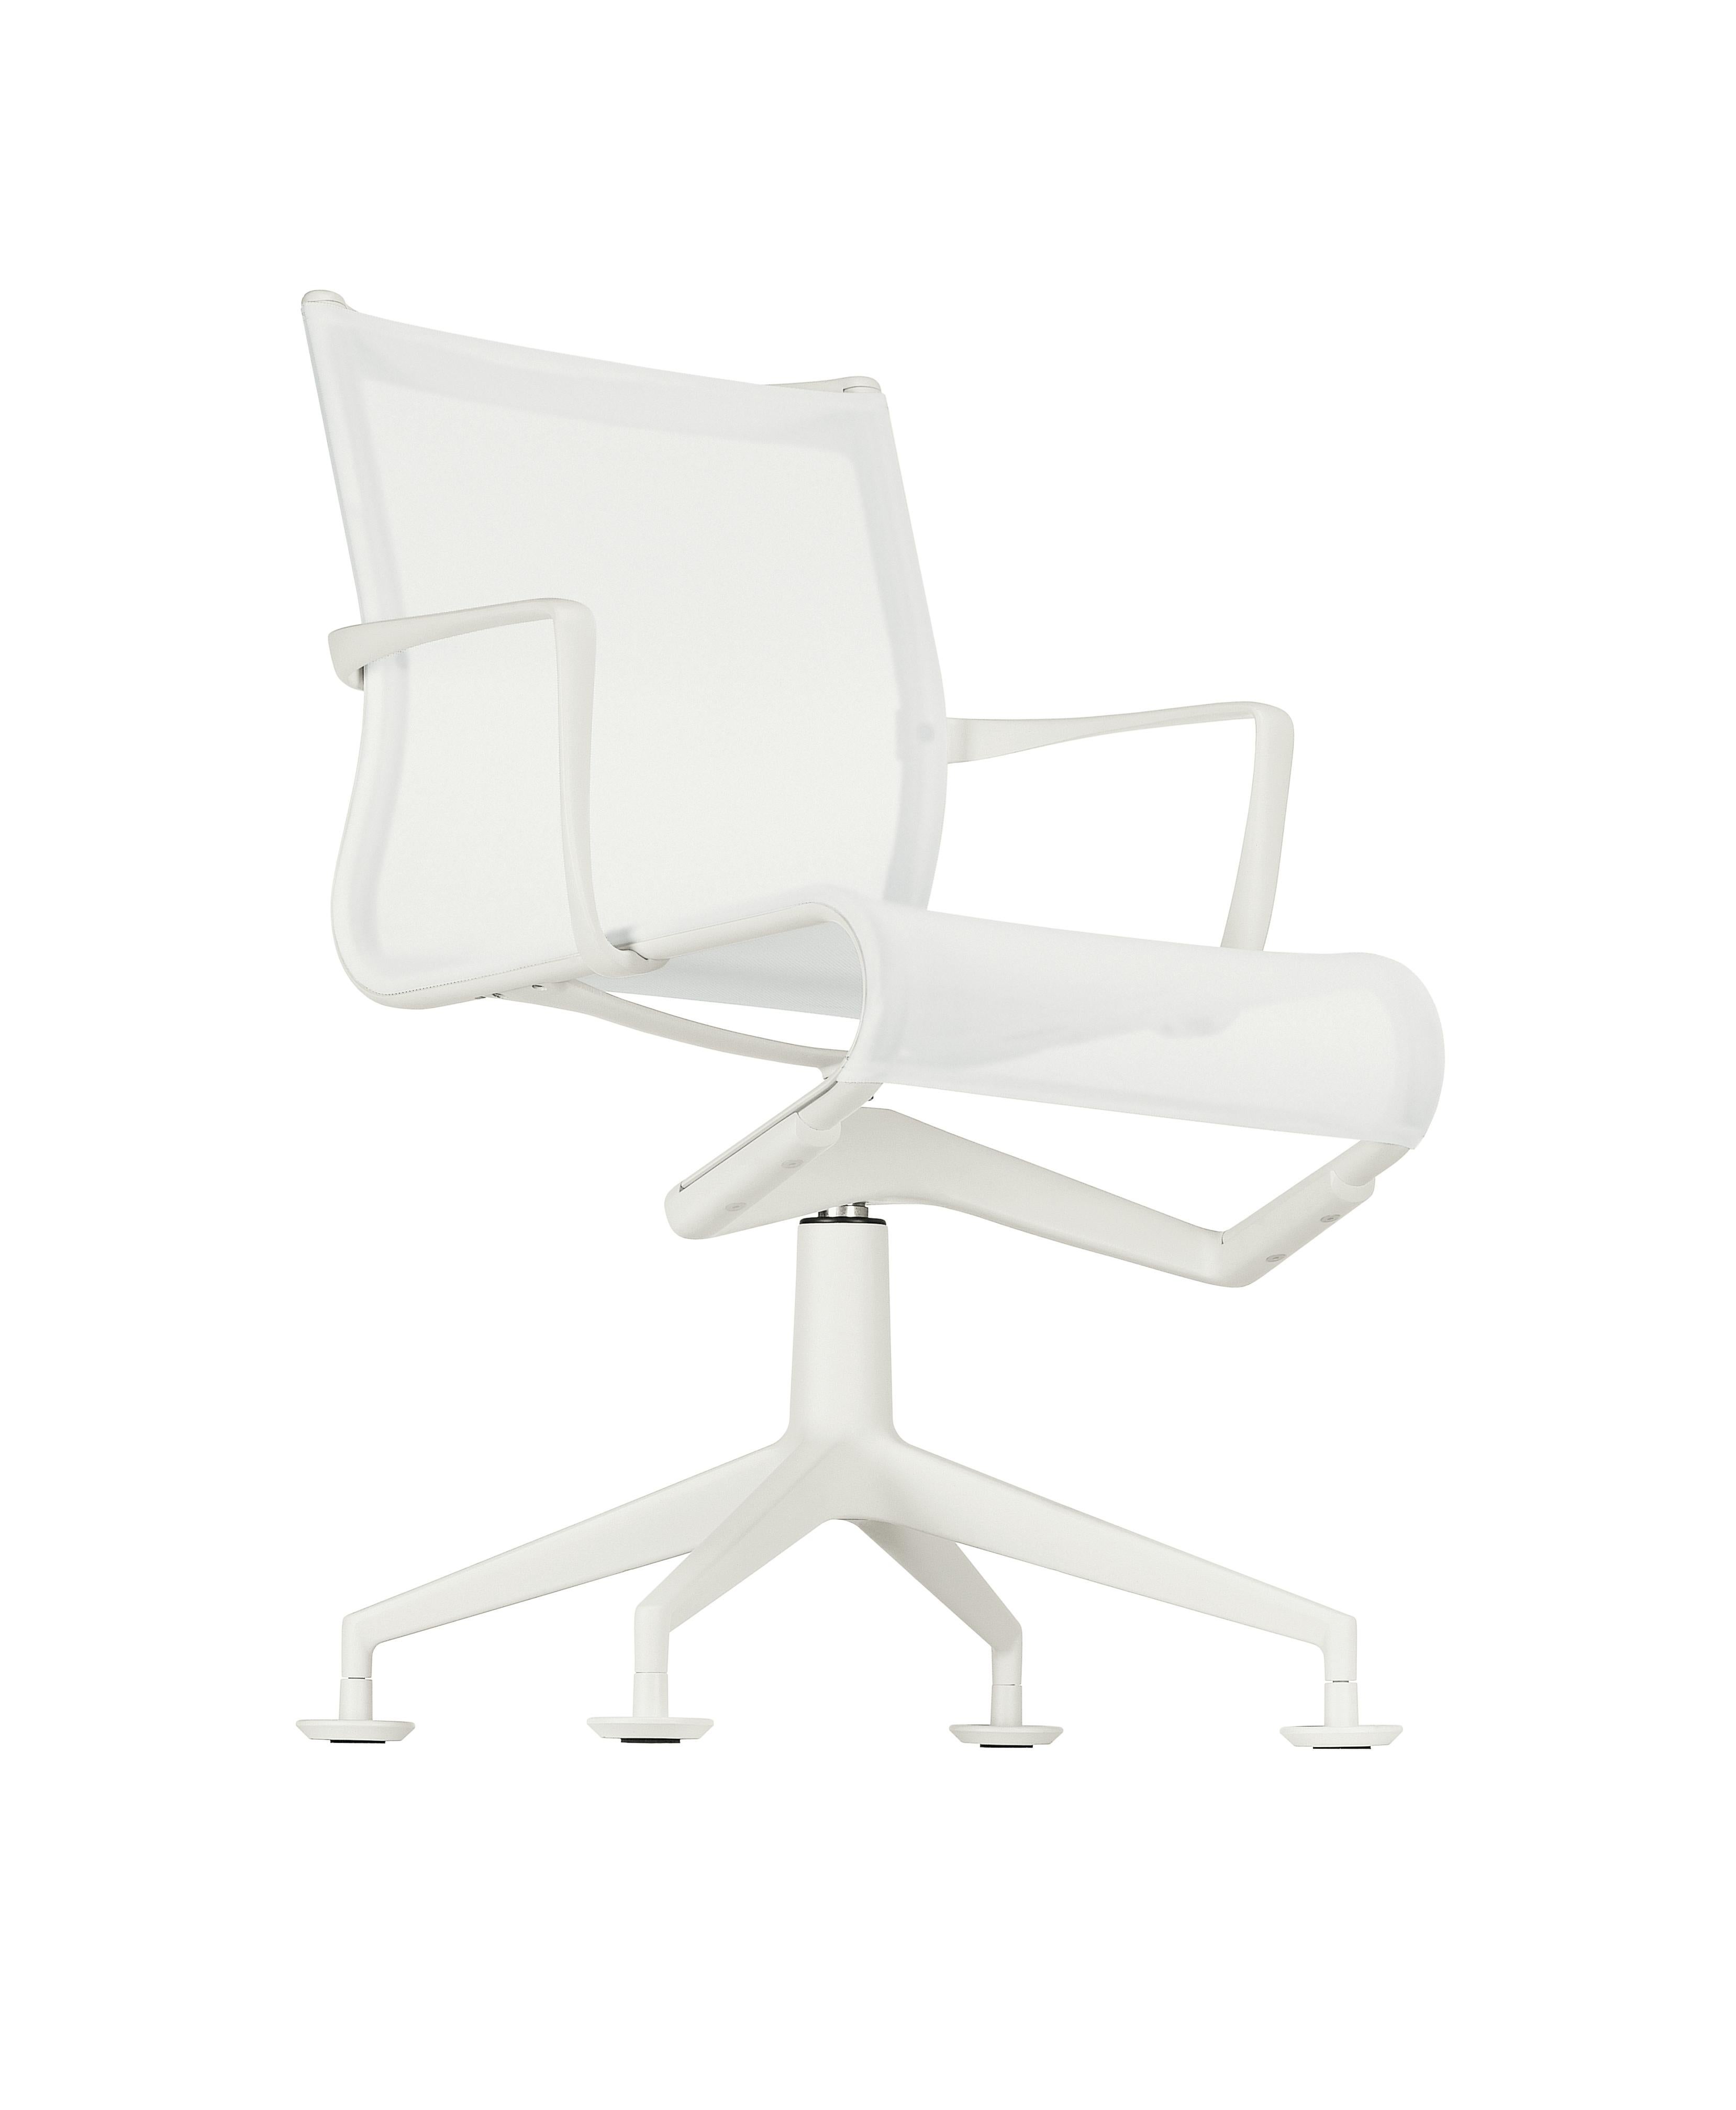 Alias 447 Meetingframe+ Tilt 47 Chair in White Mesh w Lacquered Aluminum Frame by Alberto Meda

Self adjusting swivel chair with arms, with 4-star base with glides and tilting mechanism. Structure made of extruded aluminium profile and die-cast